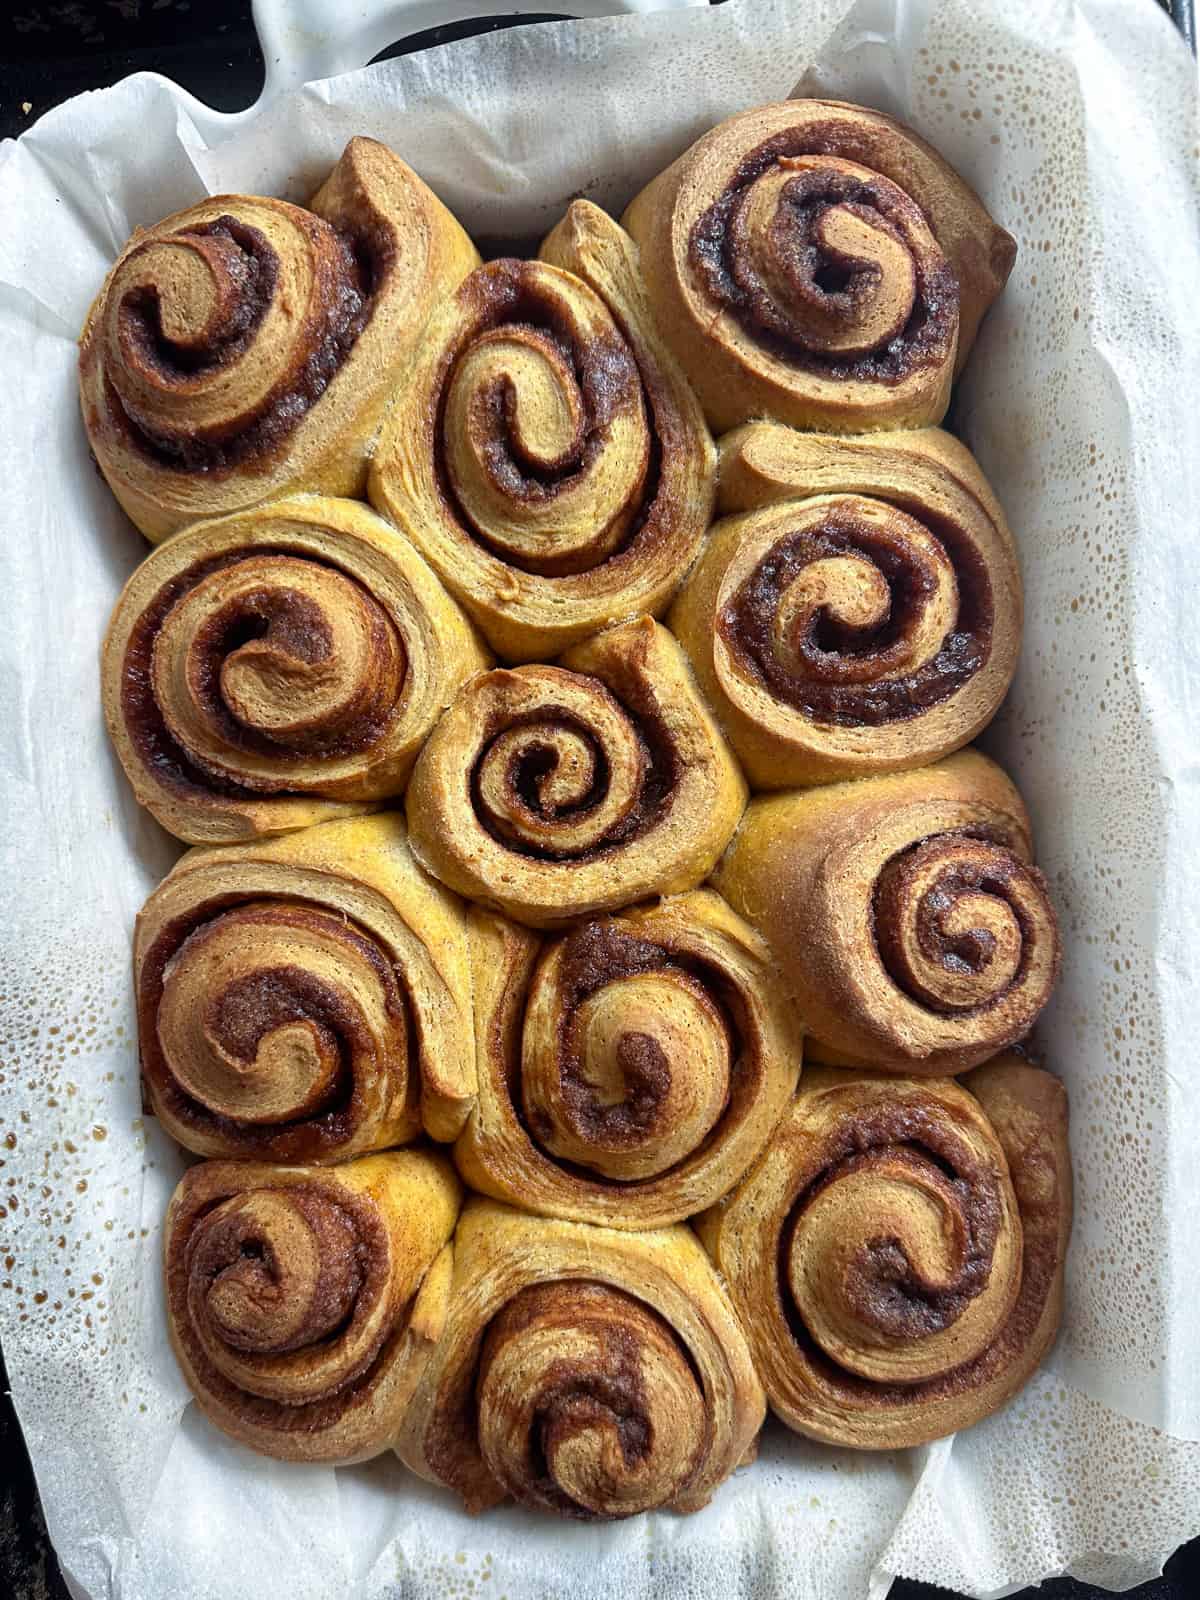 Just baked cinnamon pumpkin buns before frosting. 